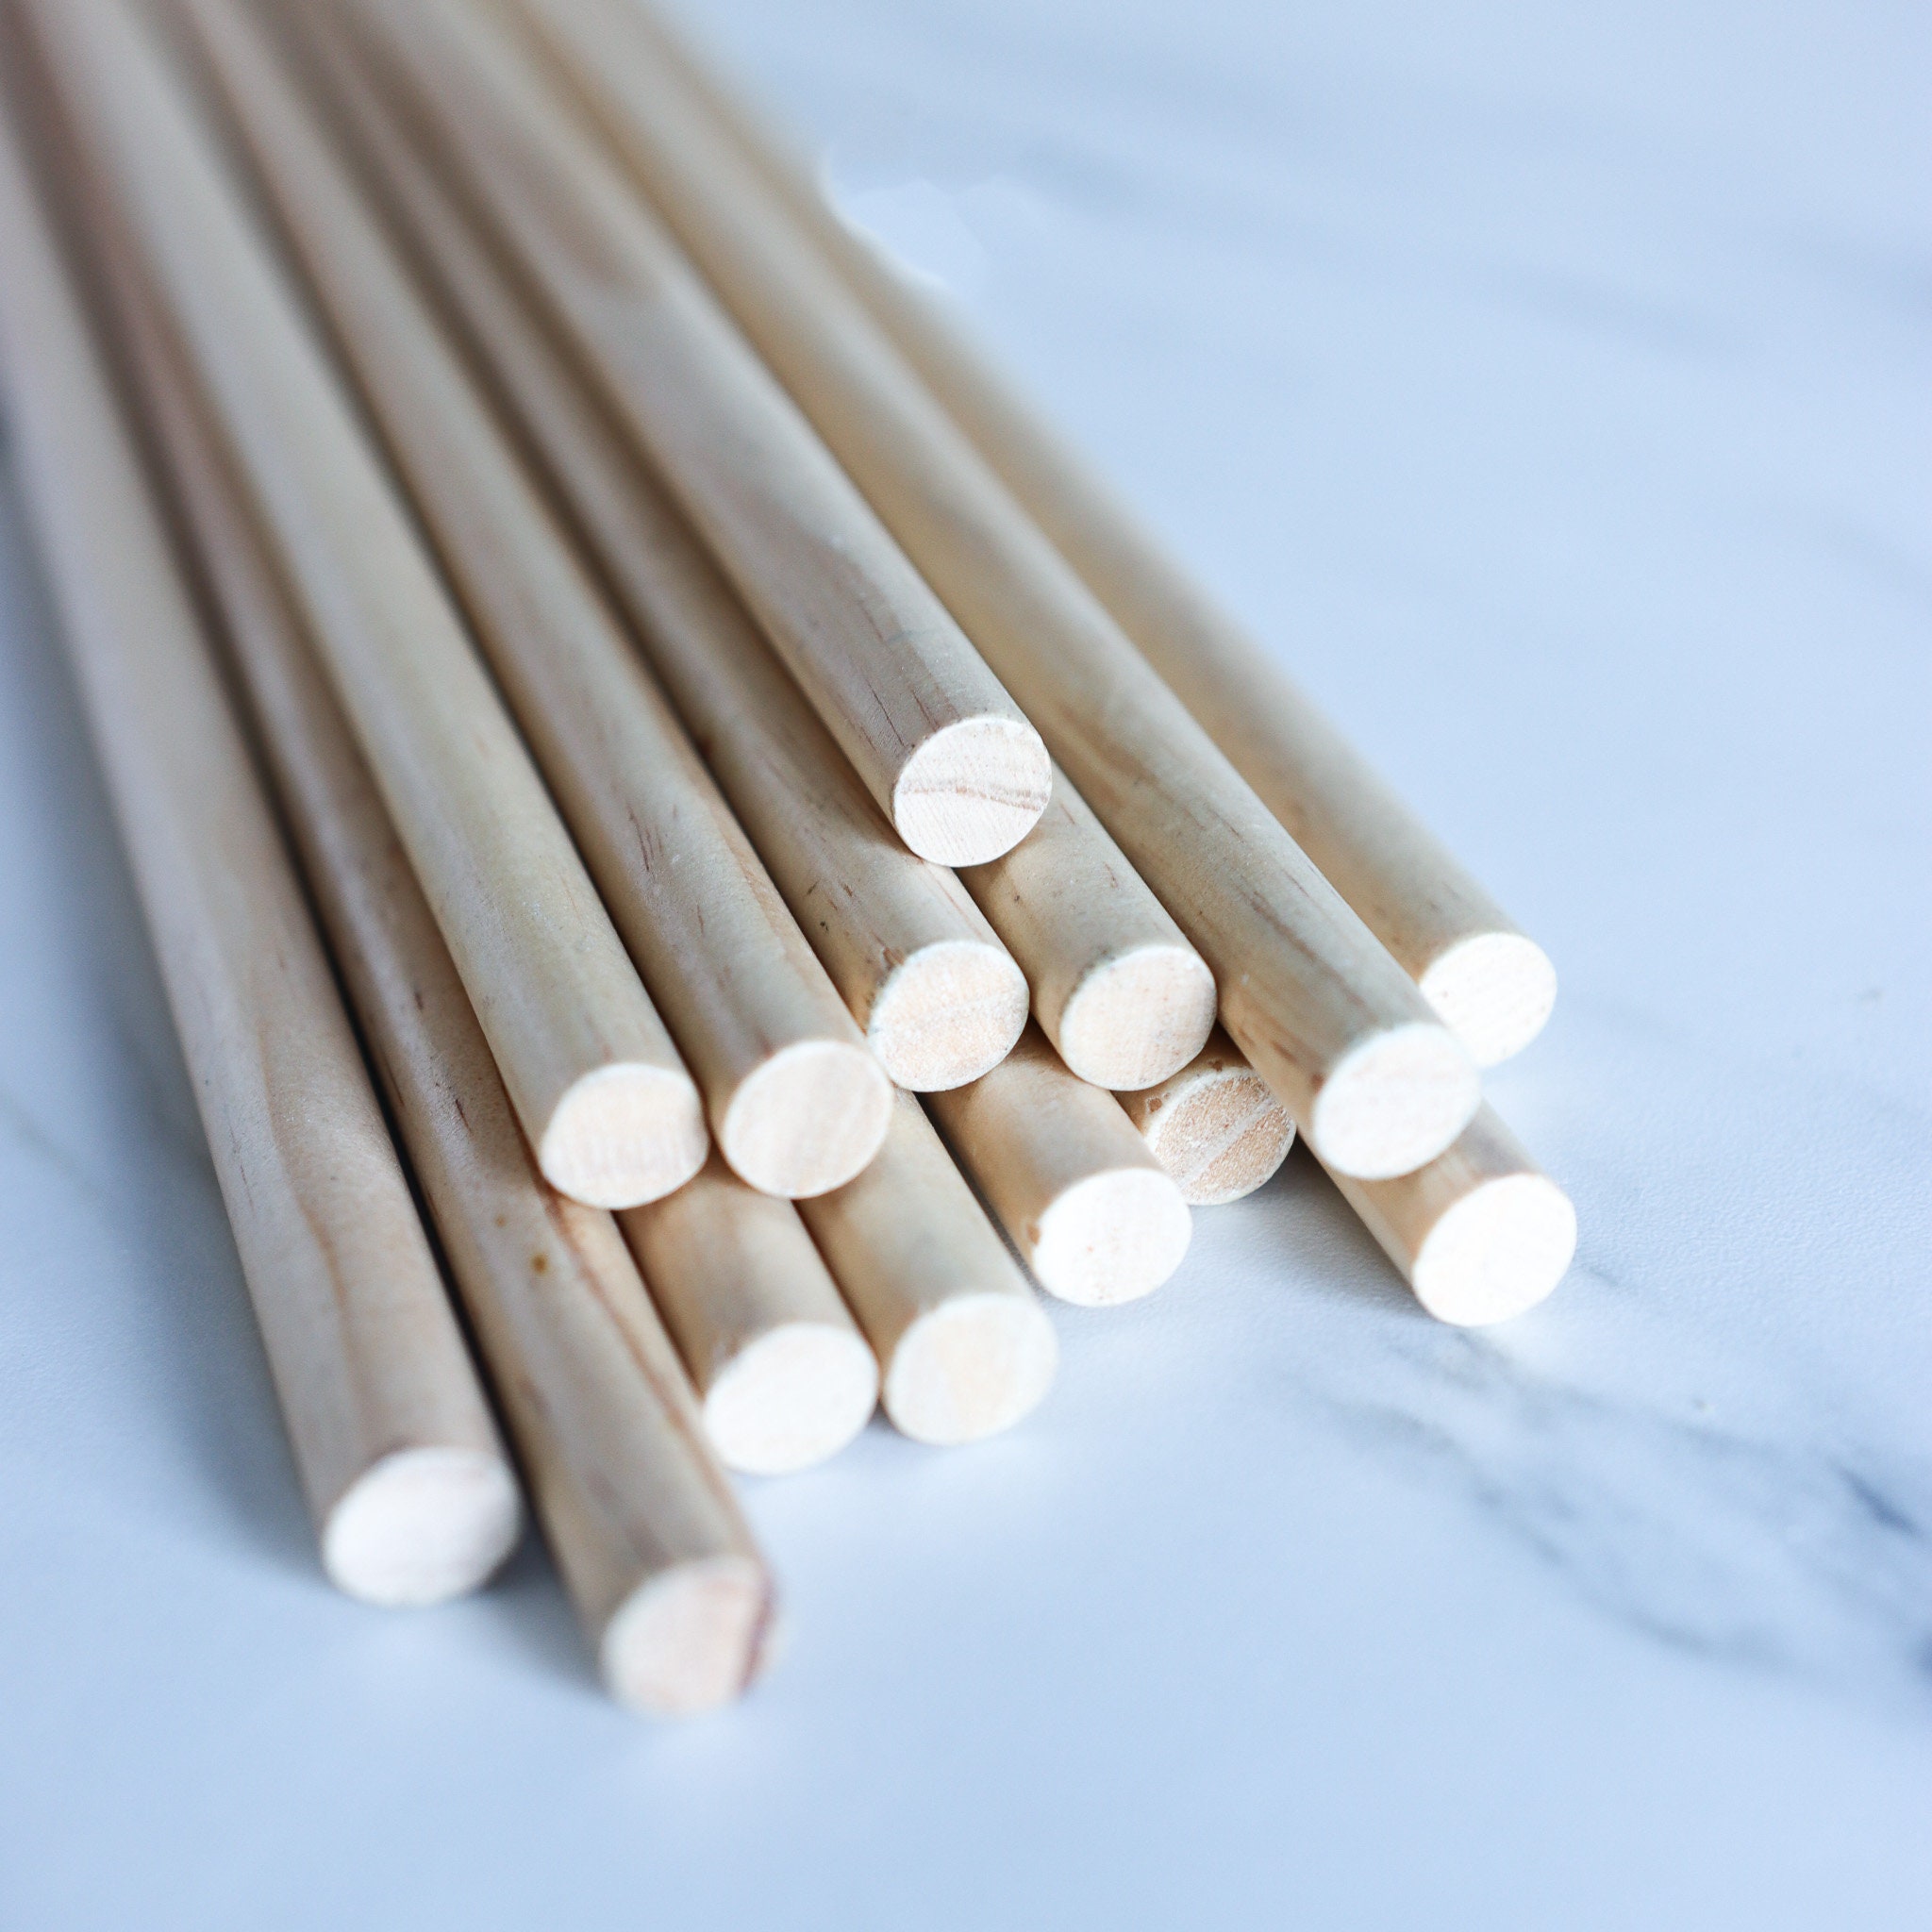 18 Pcs Thicken Cake Dowels Rods (24cm) with 4 Cake Boards